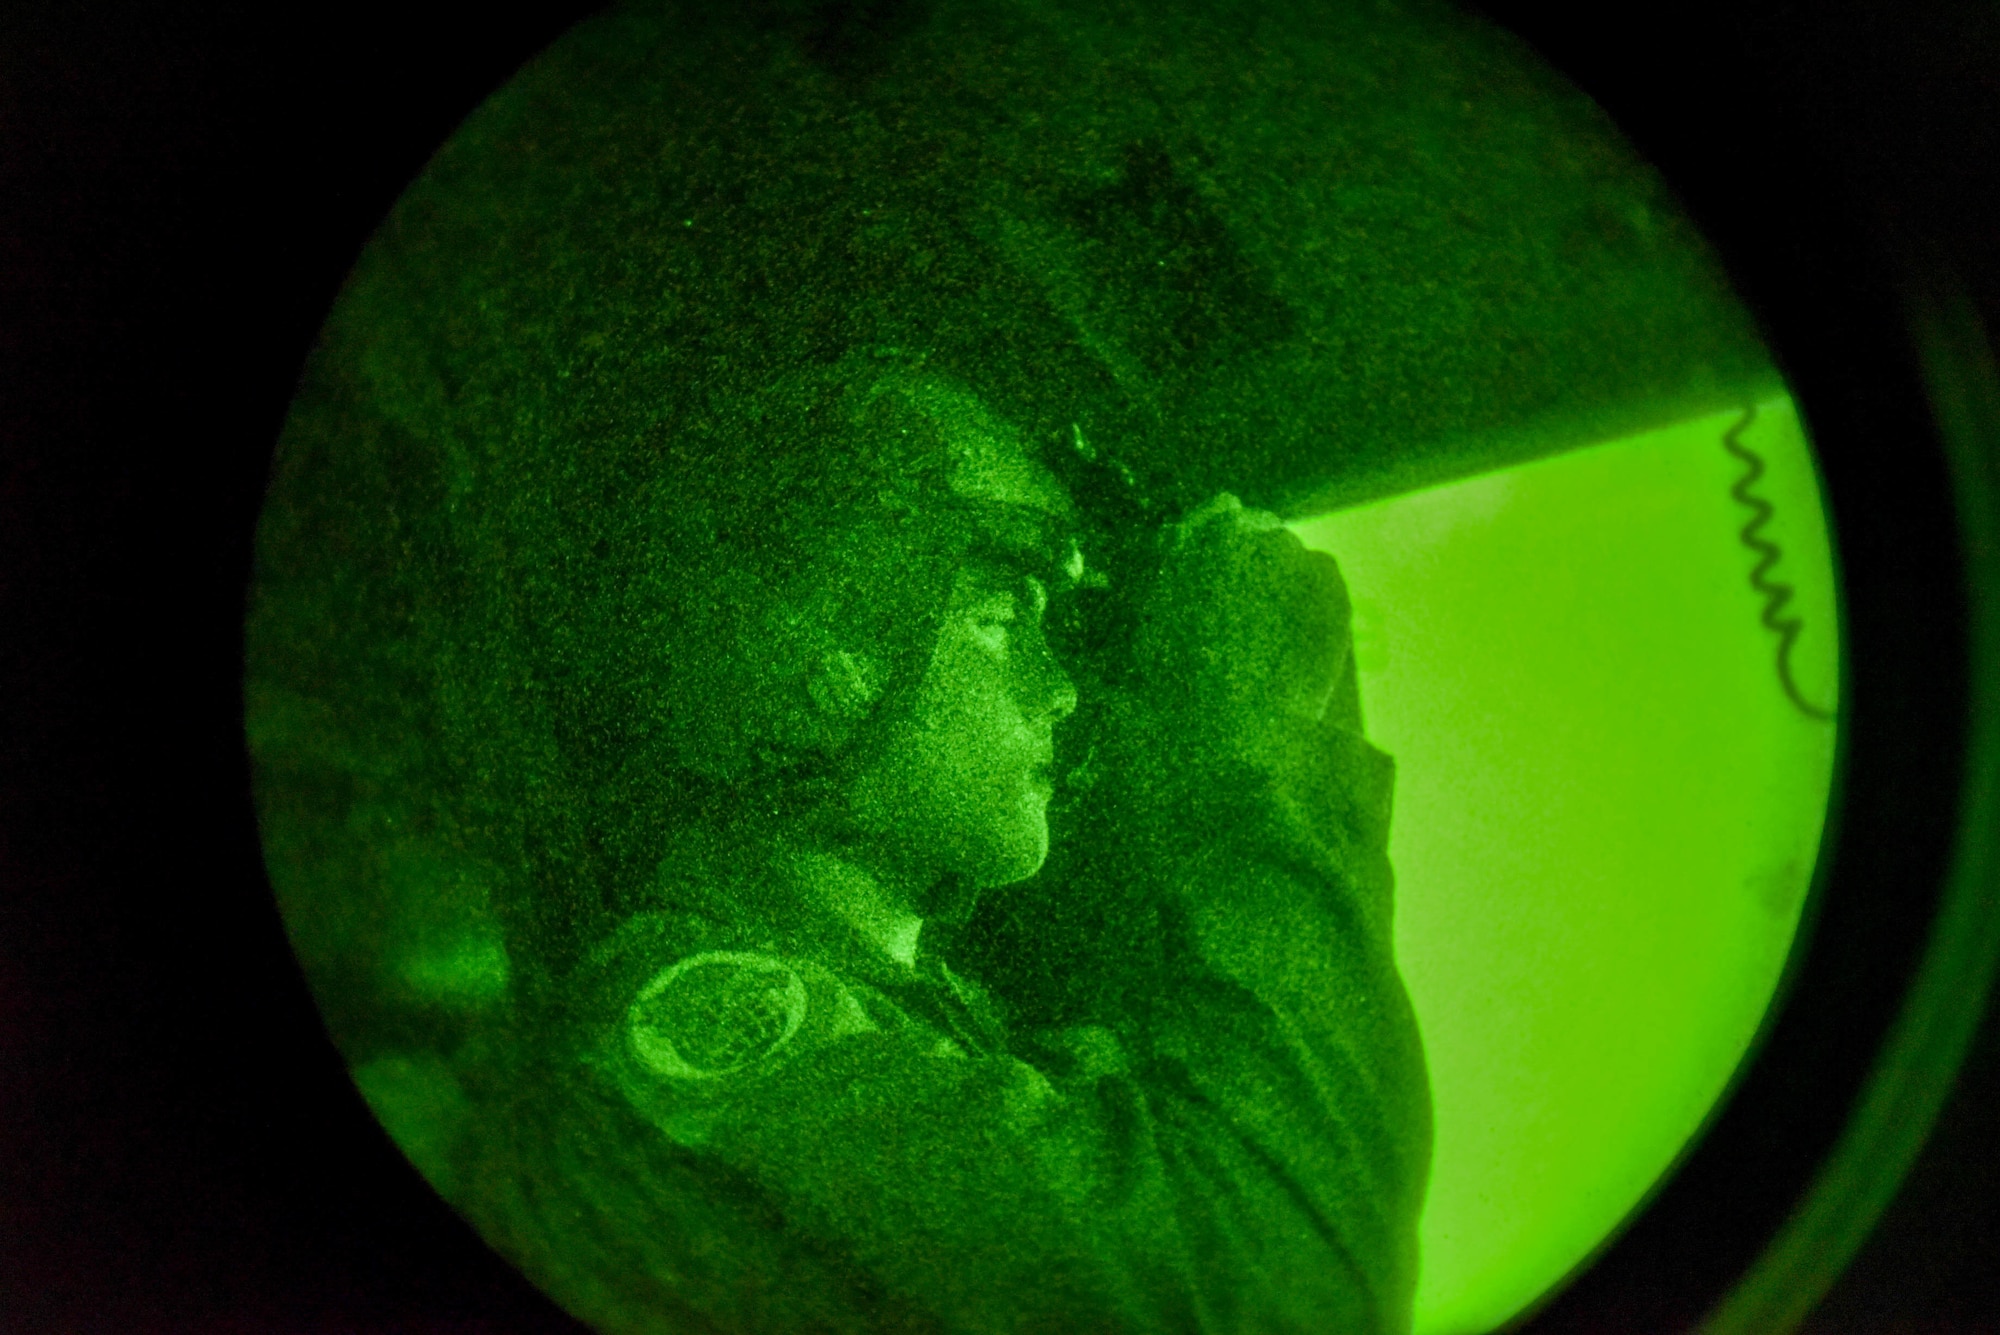 U.S. Air Force Capt. Philip Conte, 535th Airlift Squadron pilot, looks through a pair of night vision goggles during Exercise Global Dexterity 2022 at Joint Base Pearl Harbor-Hickam, Hawaii, May 5, 2022. Exercise Global Dexterity included side-by-side training of C-17s from the U.S. Air Force, Hawaii Air National Guard, and the Royal Australian Air Force to better develop tactics between the three forces. (U.S. Air Force photo by Airman 1st Class Makensie)